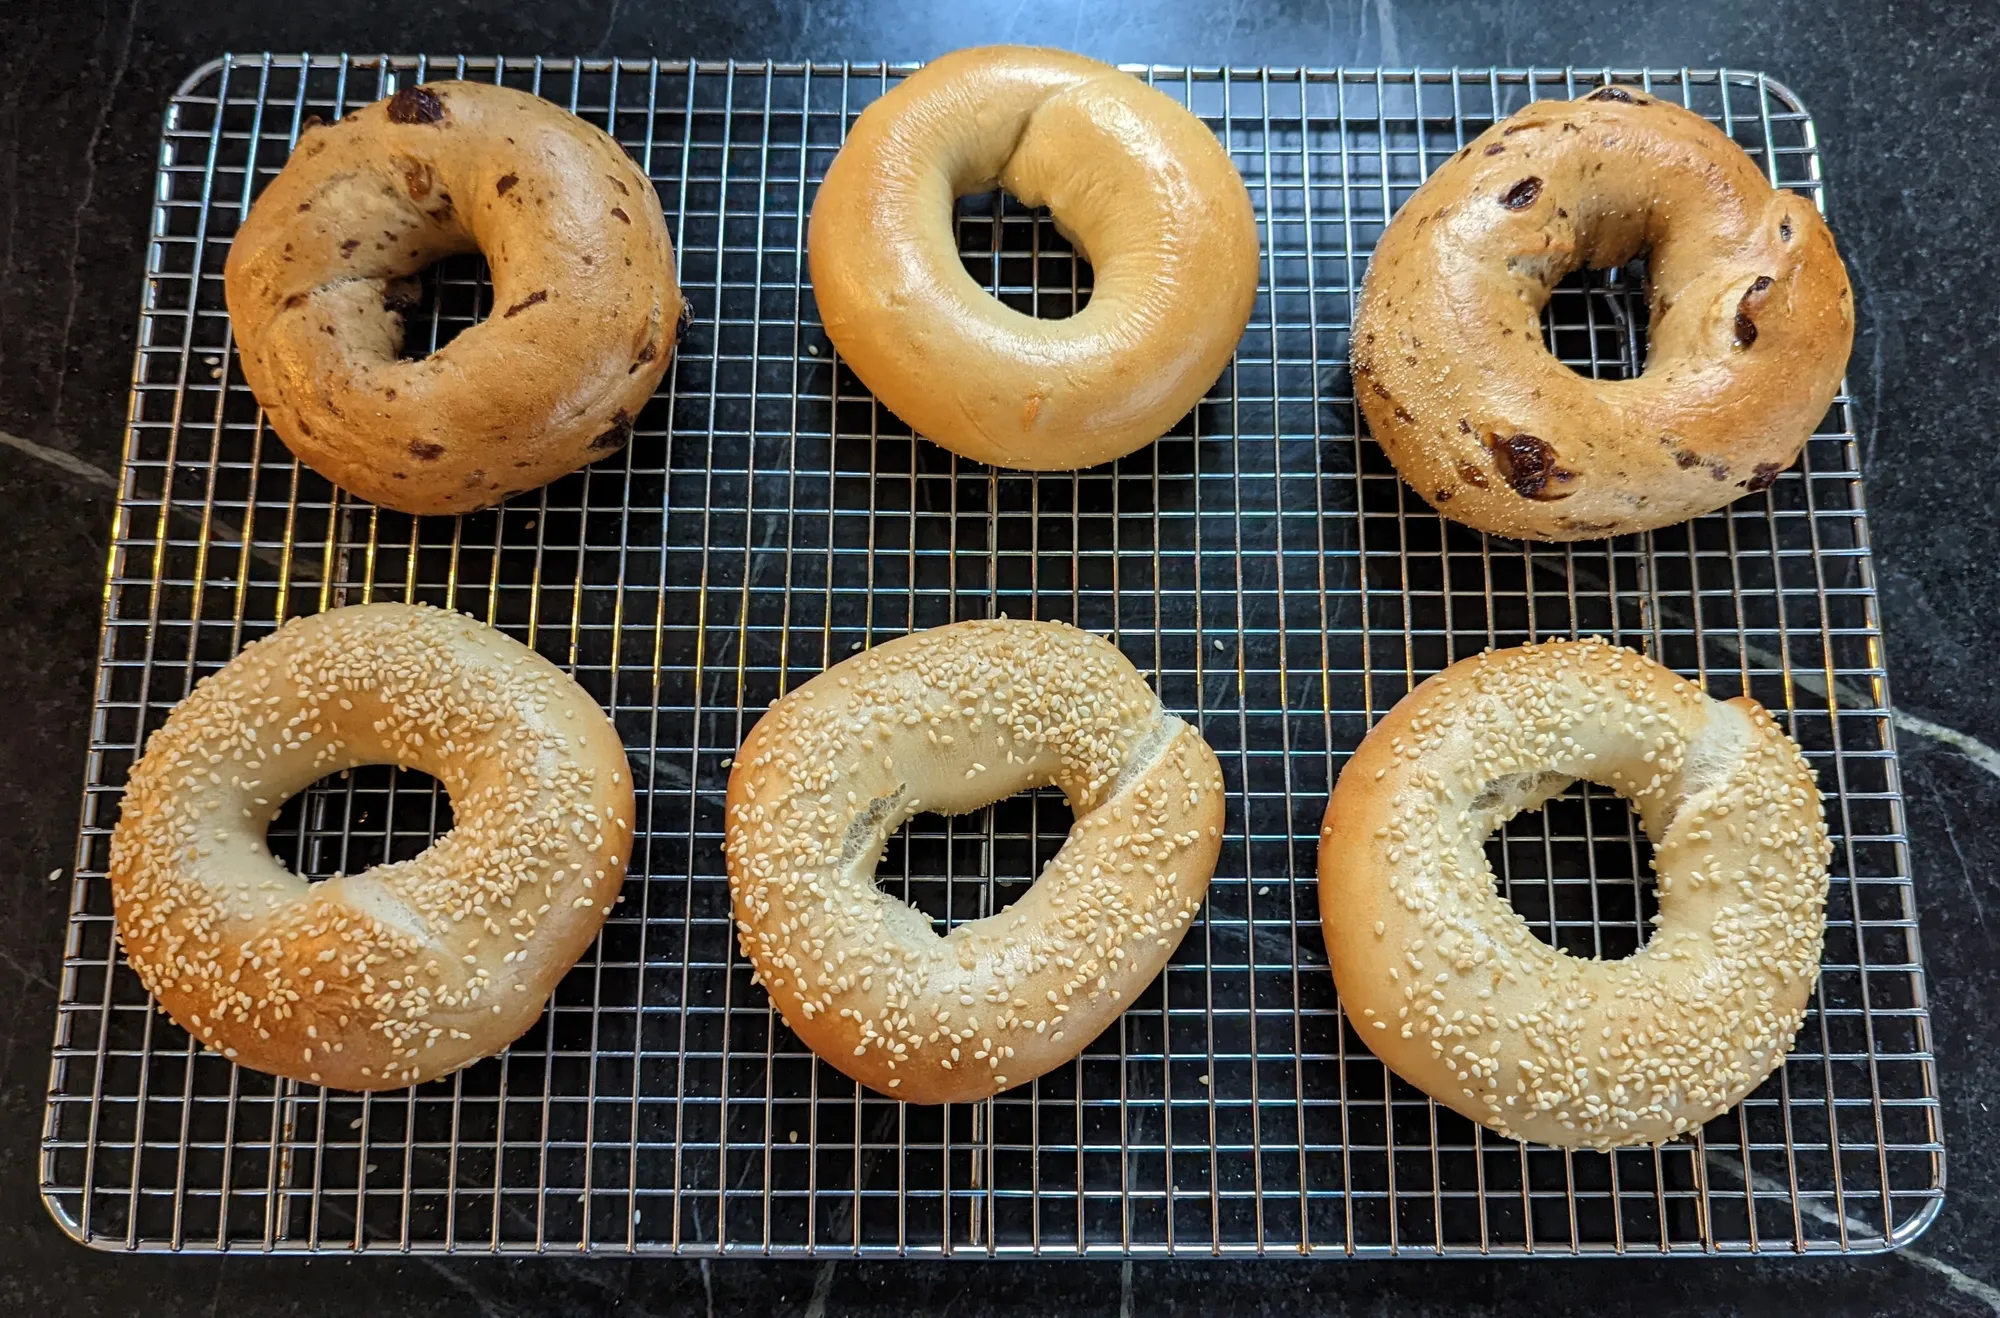 Finished cinnamon-raisin, plain and sesame bagels on a cooling rack.